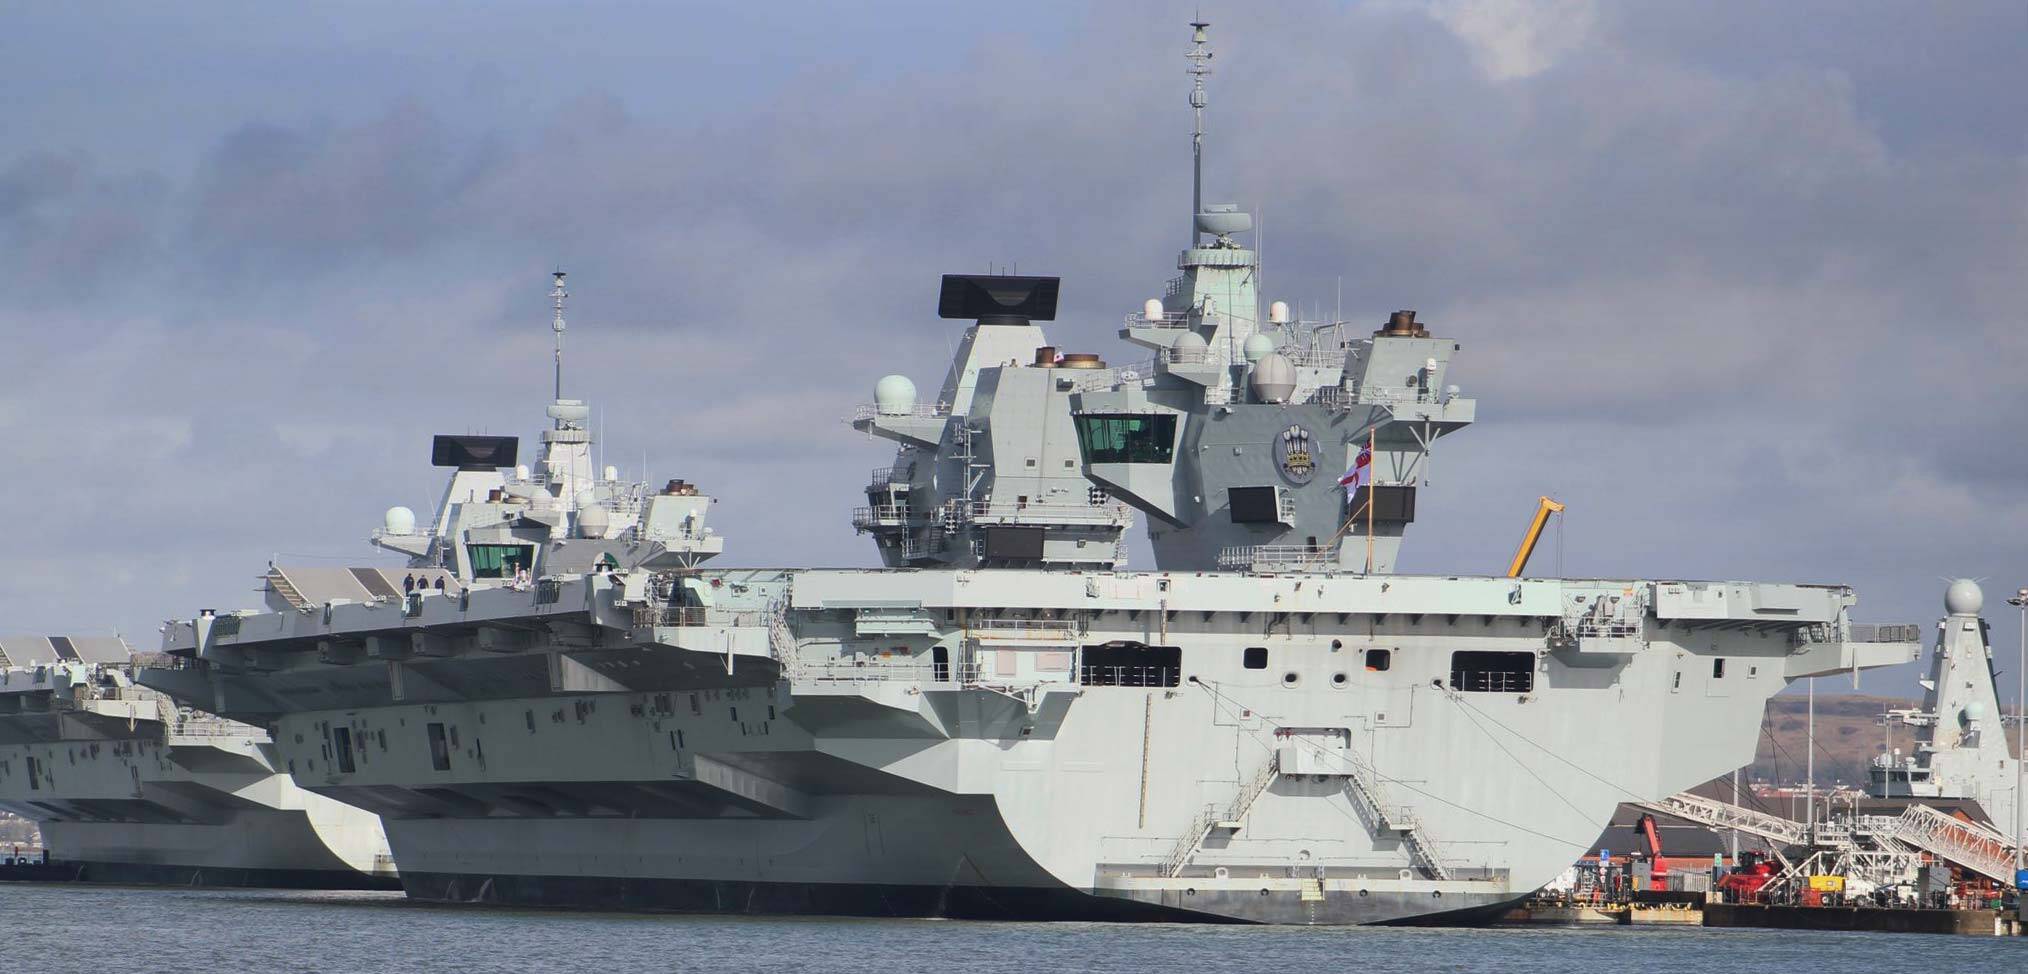 Rapid response – HMS Prince of Wales sails to replace her sister ship at short notice